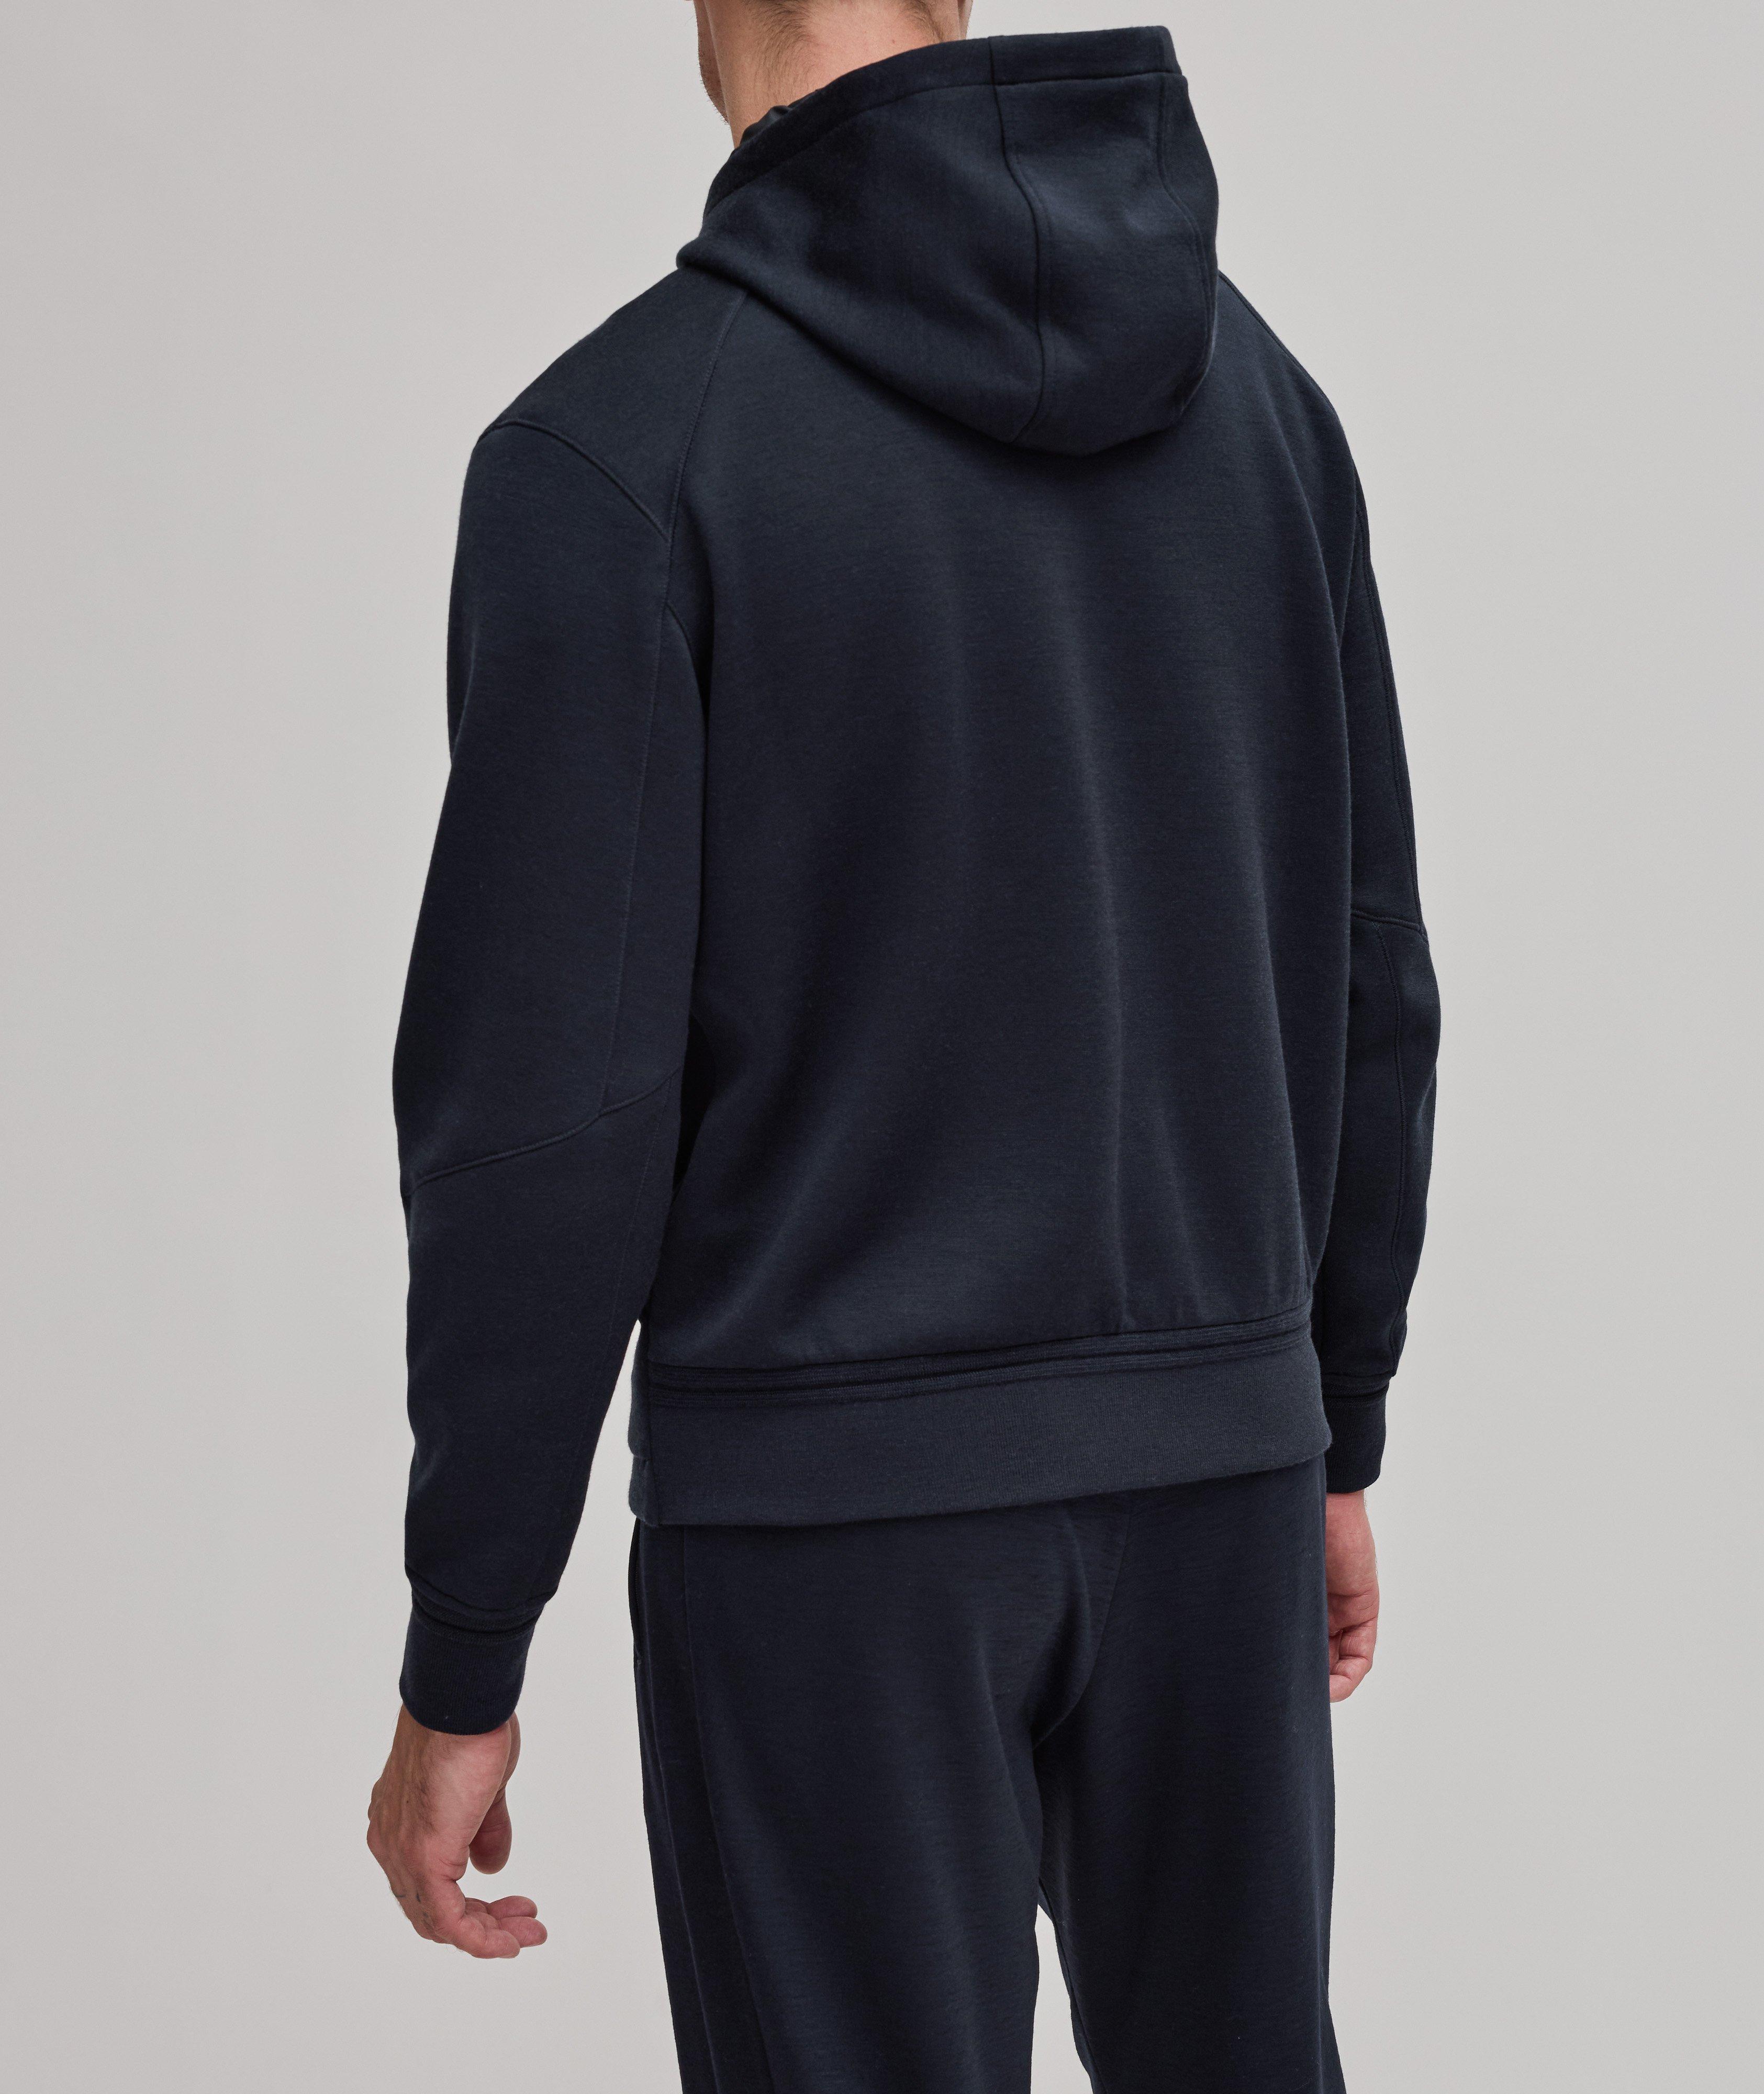 Full-Zip High Performance Hooded Sweater image 2